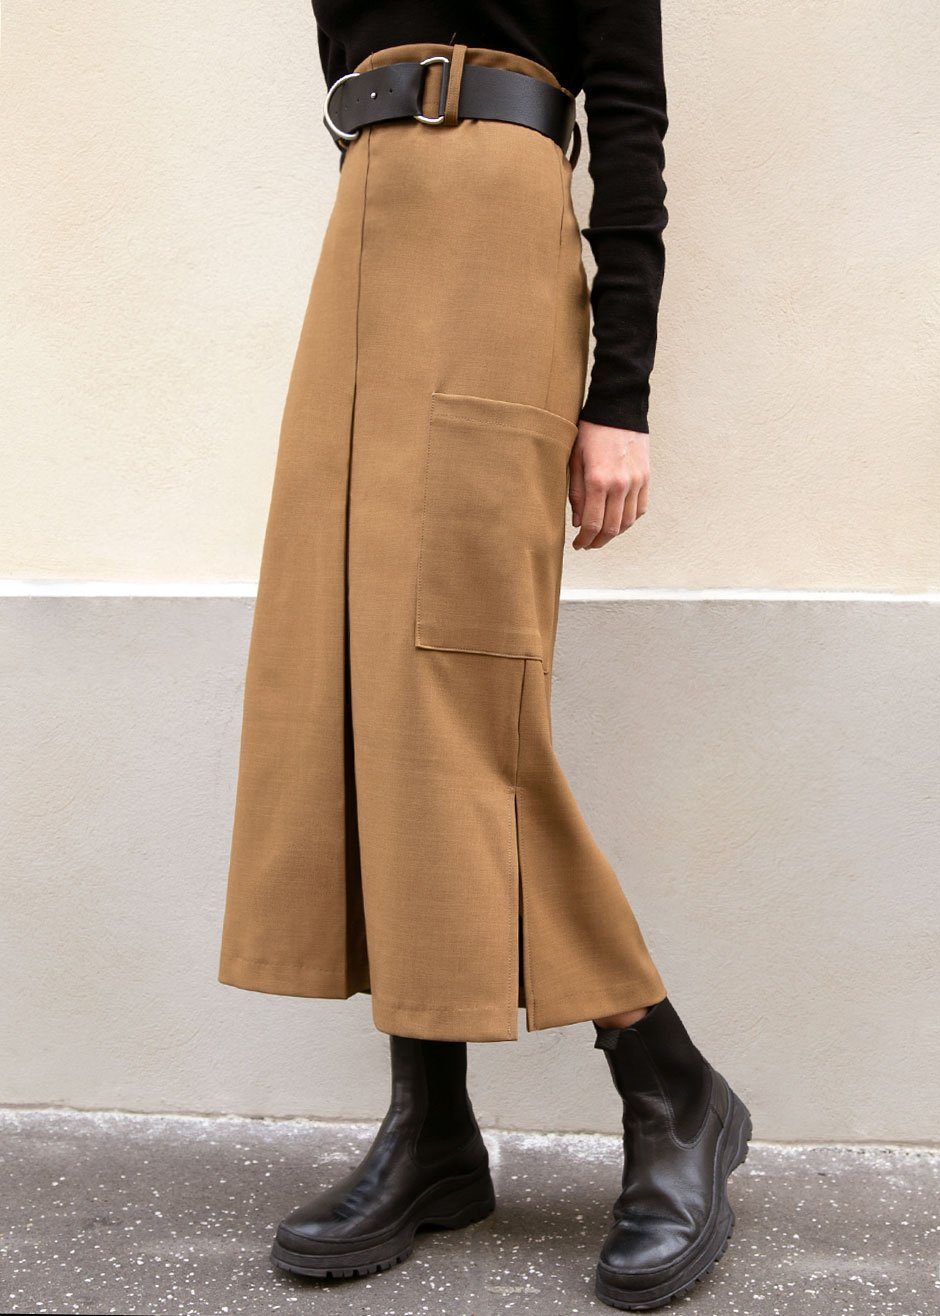 How To Wear Over The Knee Boots With A Skirt  Something Good